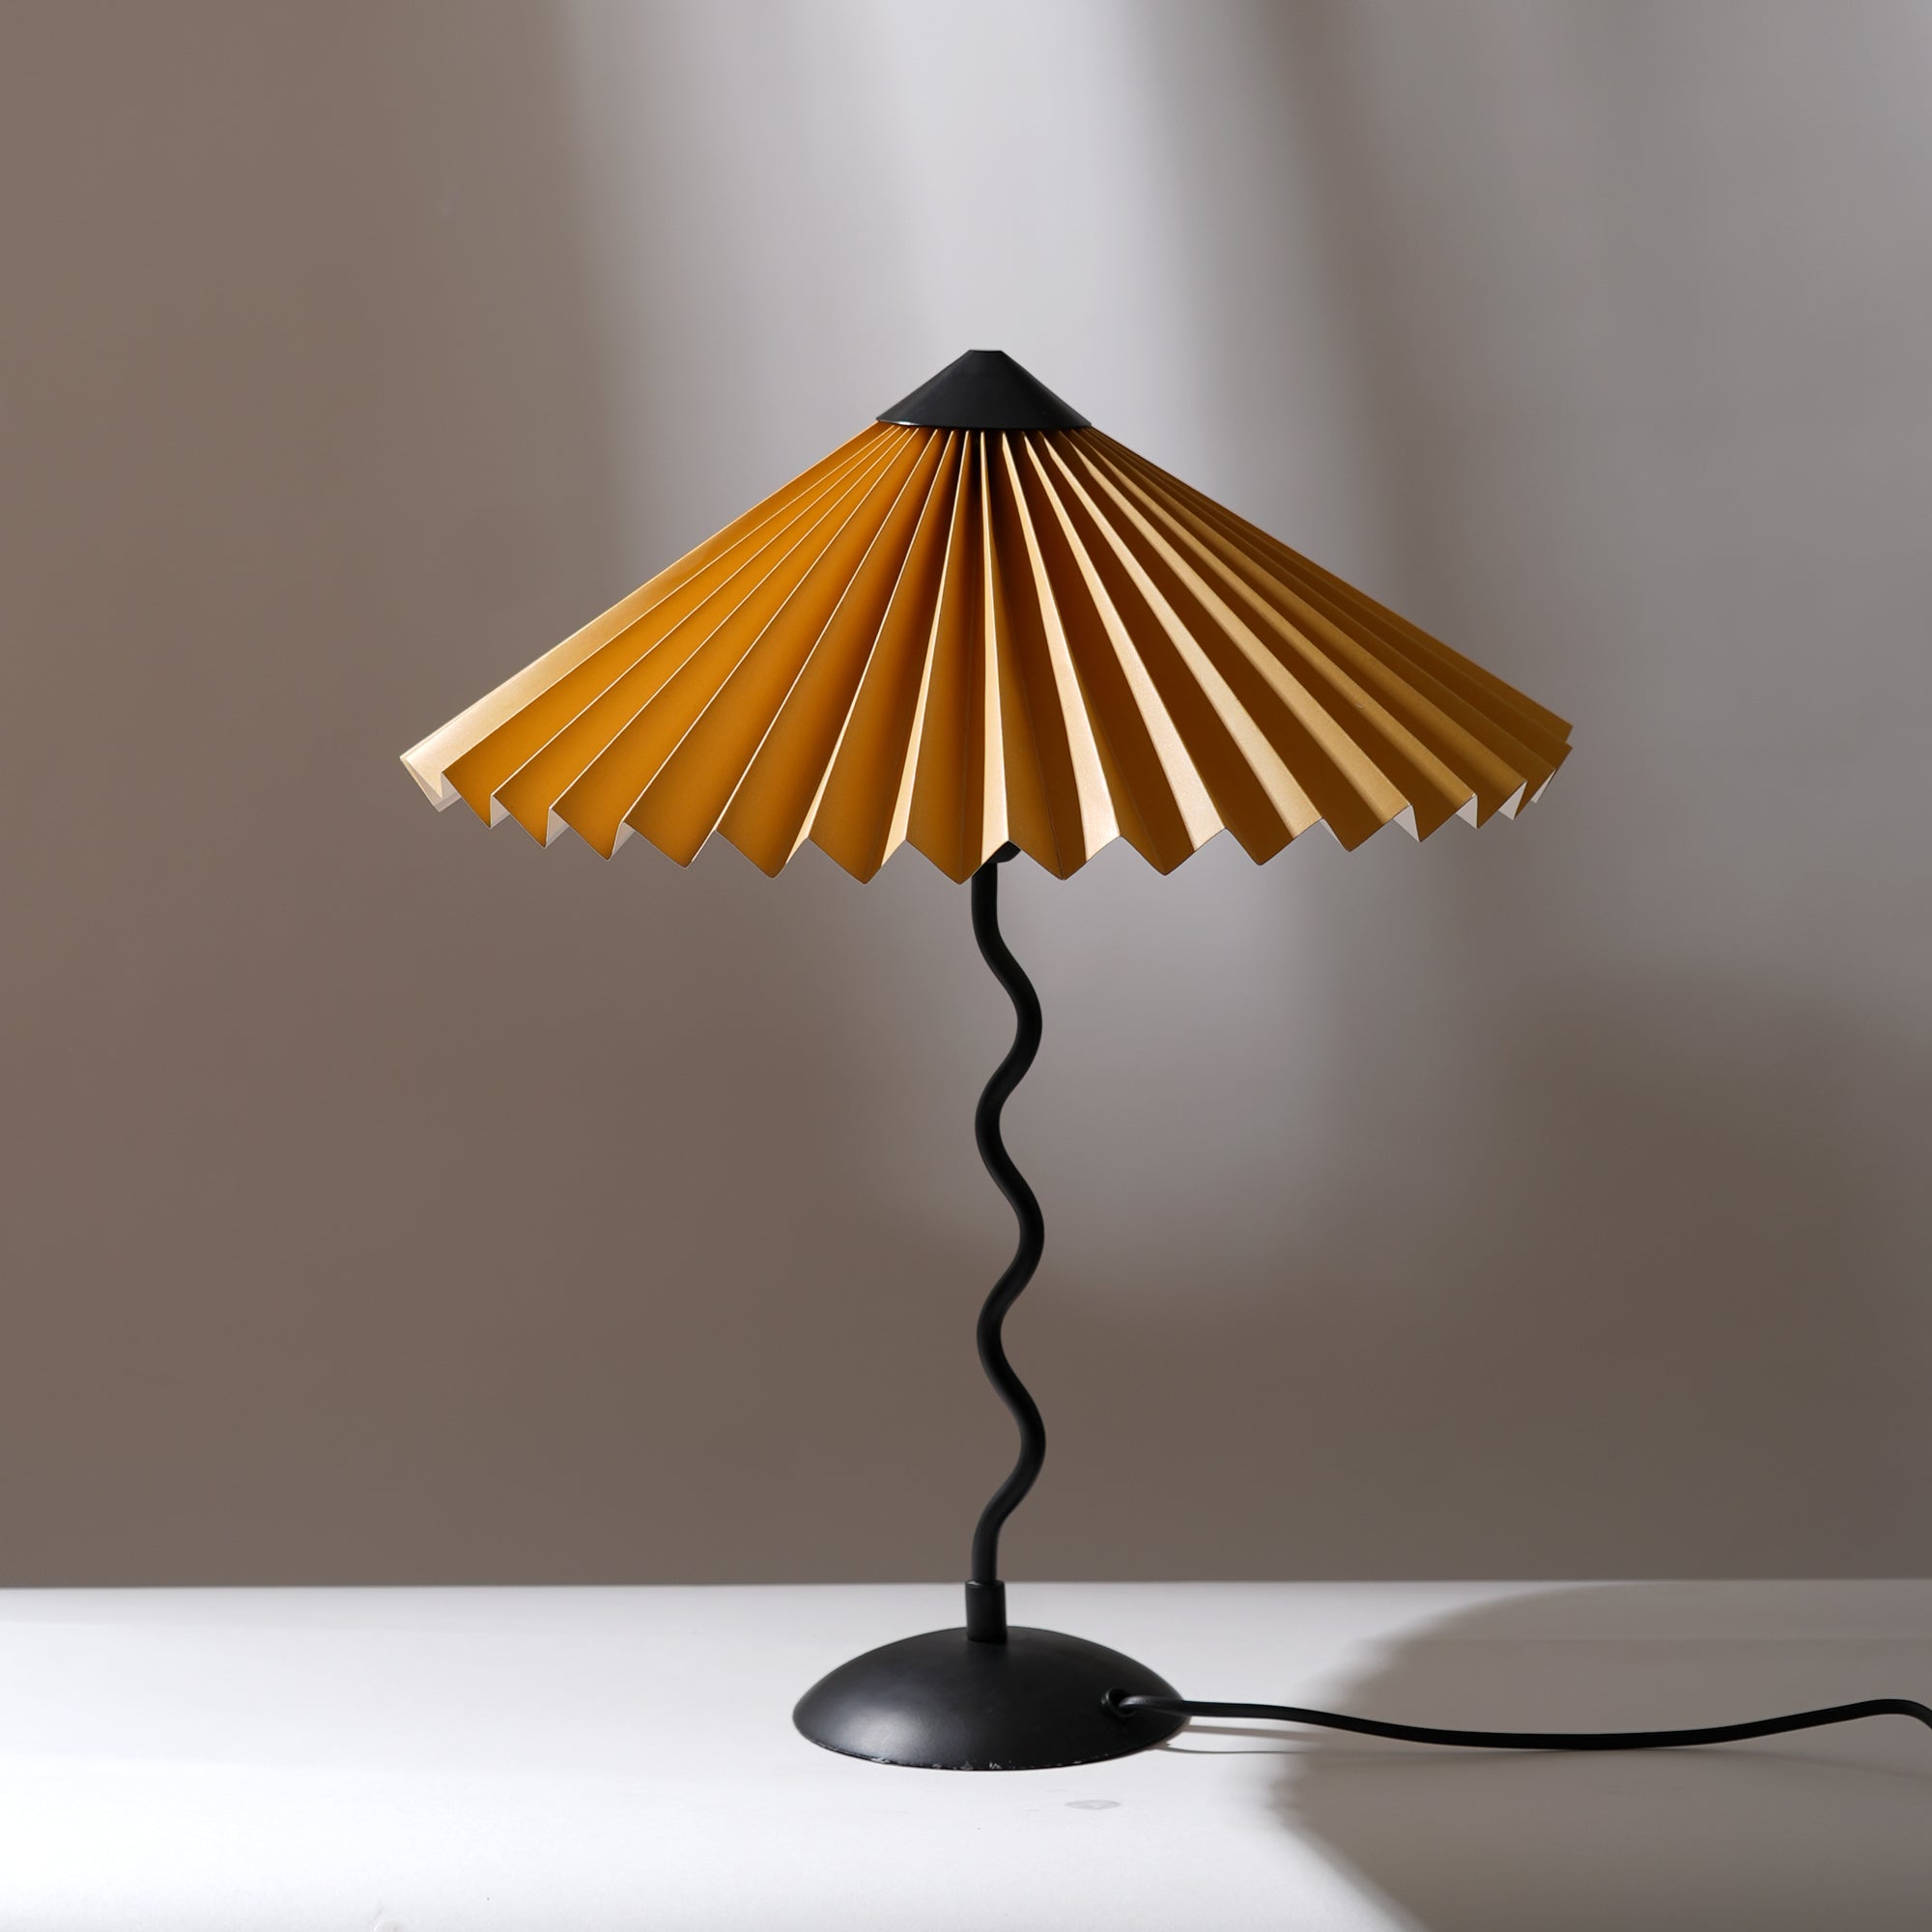 Wavy Table Lamp - Contemporary Metal Base Lighting with Handpleated Shade